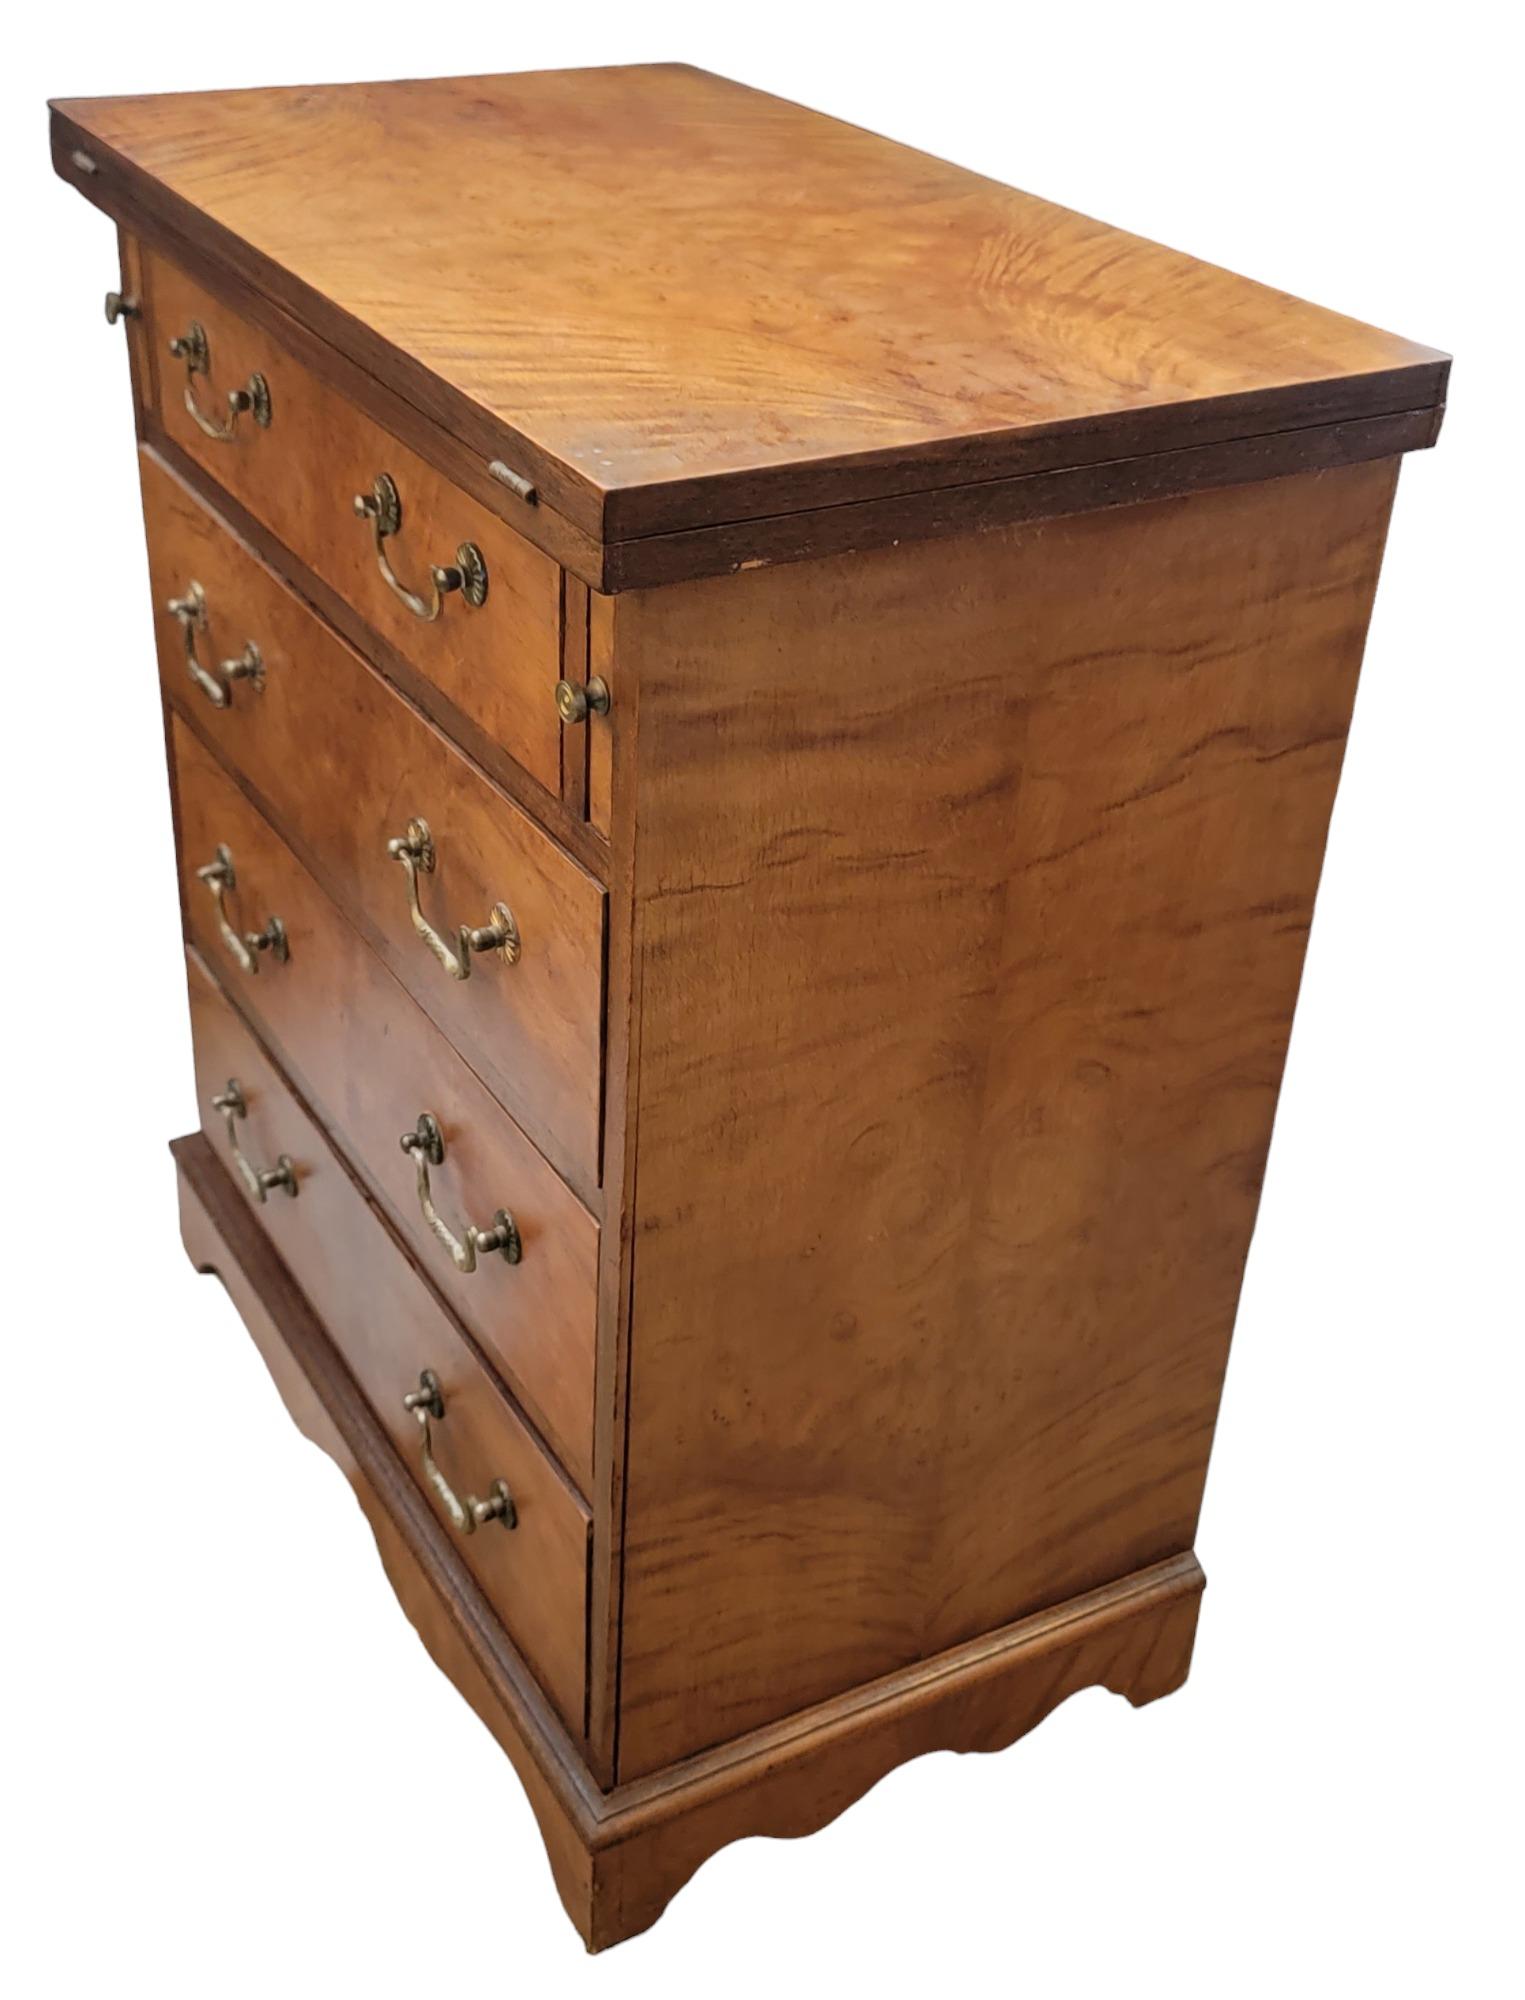 Walnut Bachelors Chest of Drawers with Brass Handles. The top opens up to make double the width. This may be used as a desk area or a sort of vanity. 

Wonderful Aged wood. Clean and polished. Great wood rings. Measures 24.75 x 14.75 x 28.75

